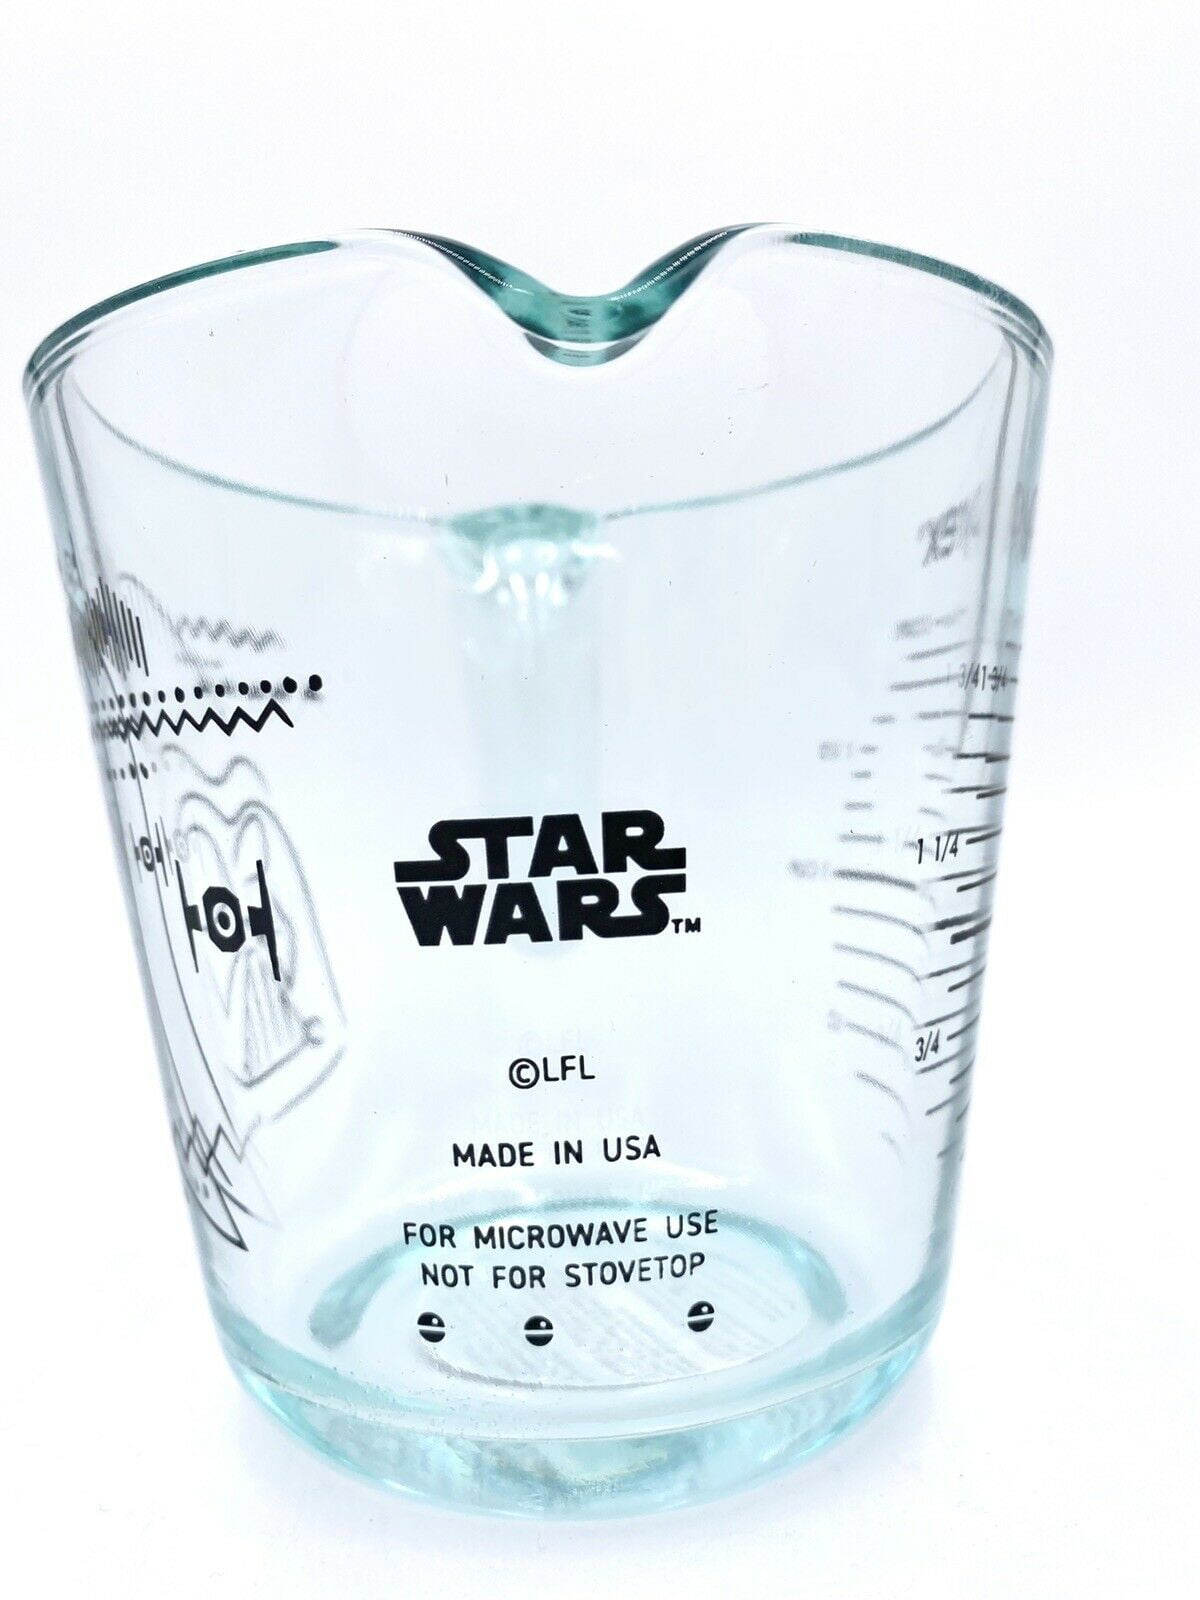  ThinkGeek Star Wars R2-D2 Measuring Cup Set - Body Built from 4  Measuring Cups and Detachable Arms Turn Into Nesting Measuring Spoons -  Unique Kitchen Gadget: Home & Kitchen